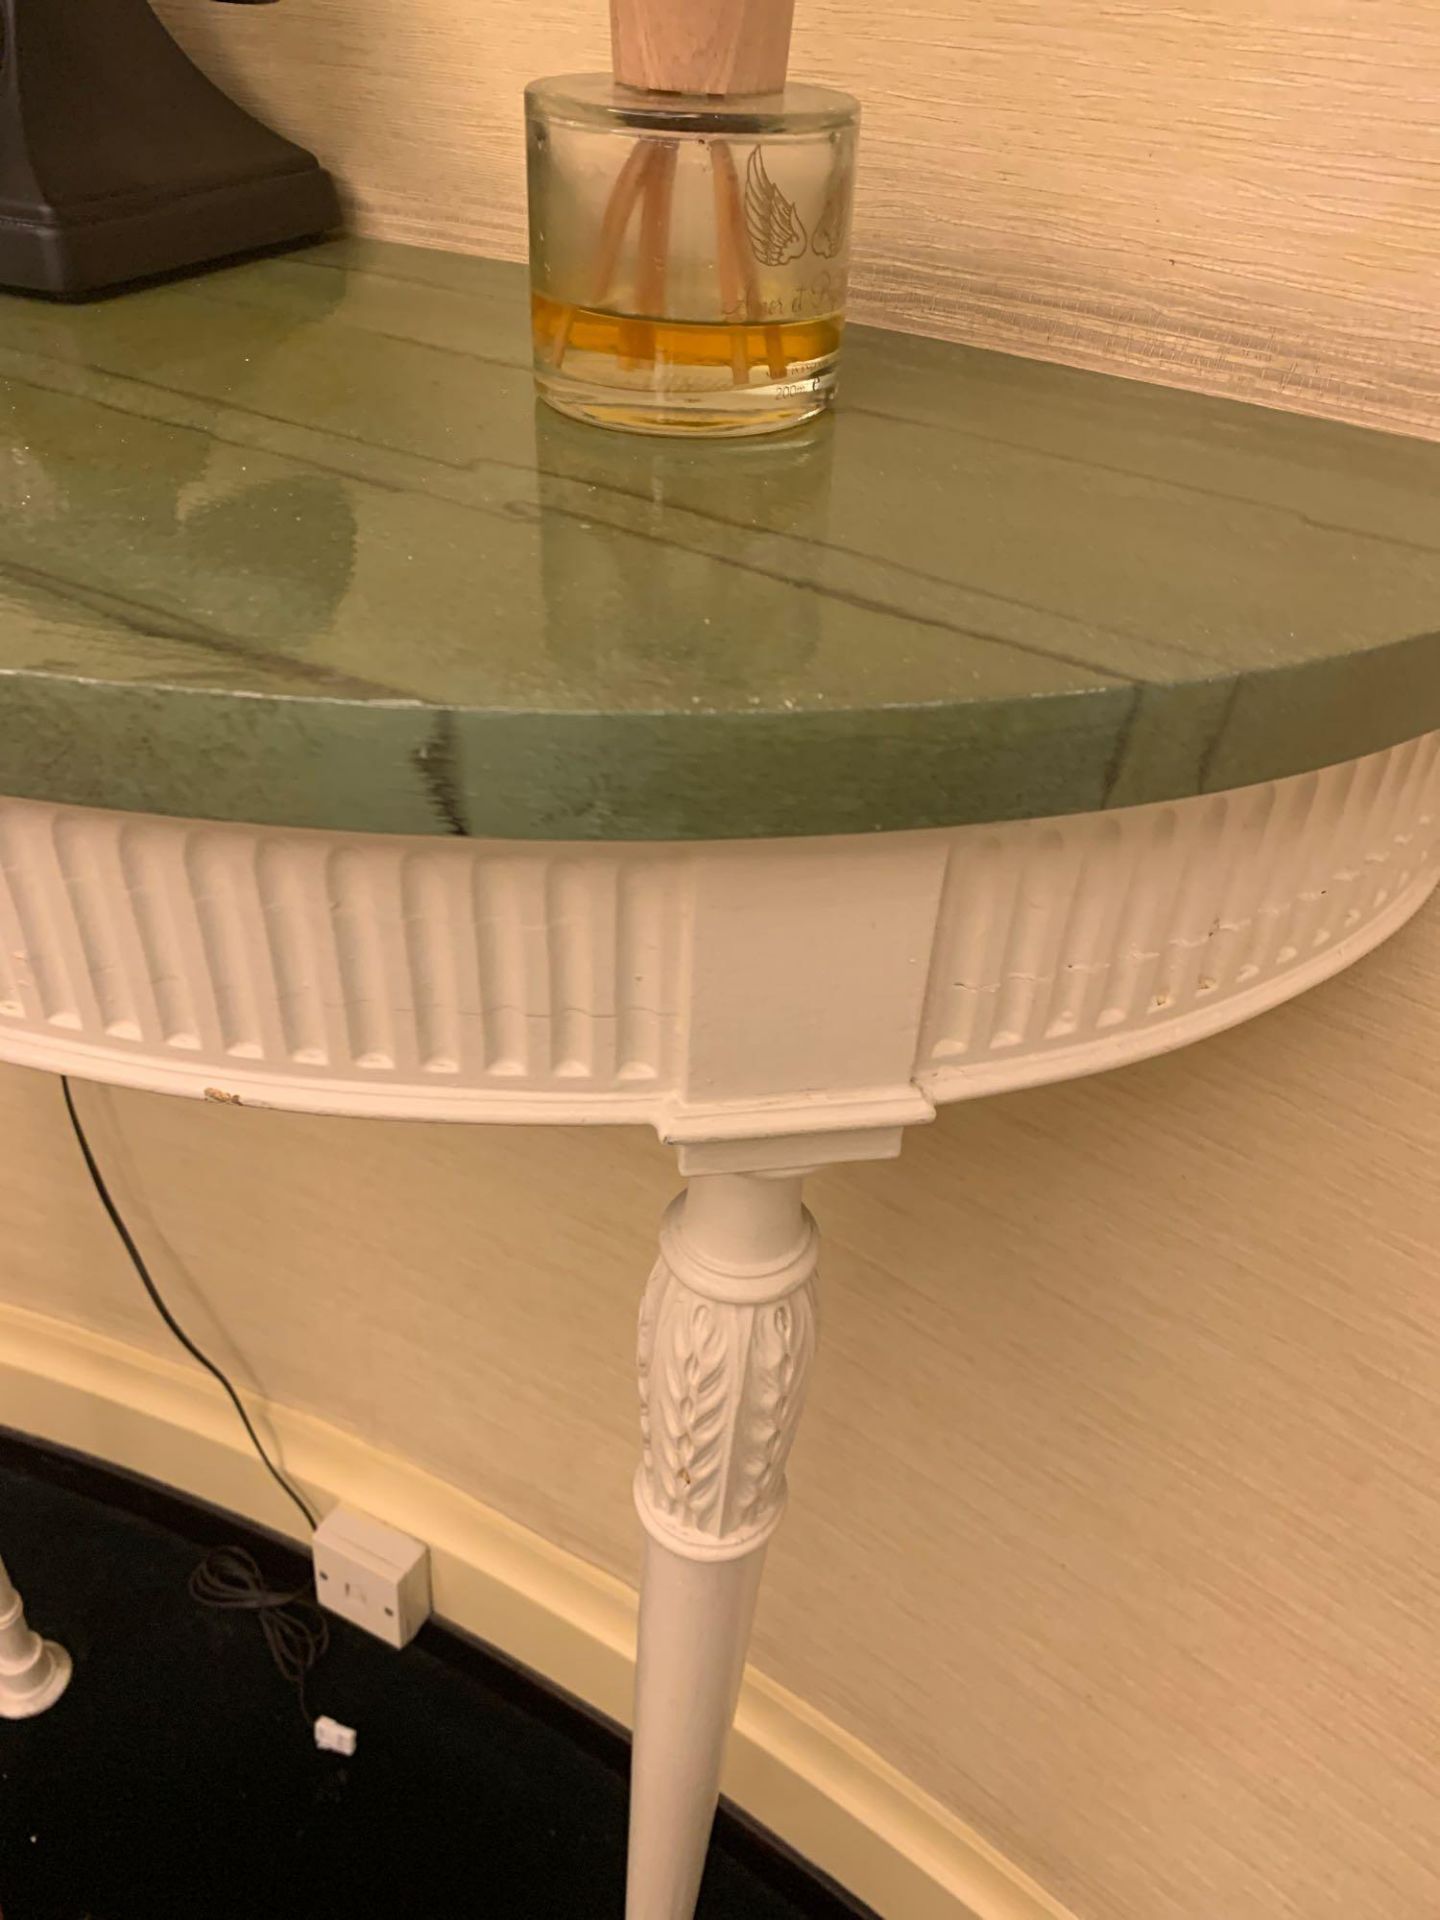 Demi Lune Console Table In Painted White With A Carved Detail Apron Below A Faux Marble Green Wood - Image 3 of 4